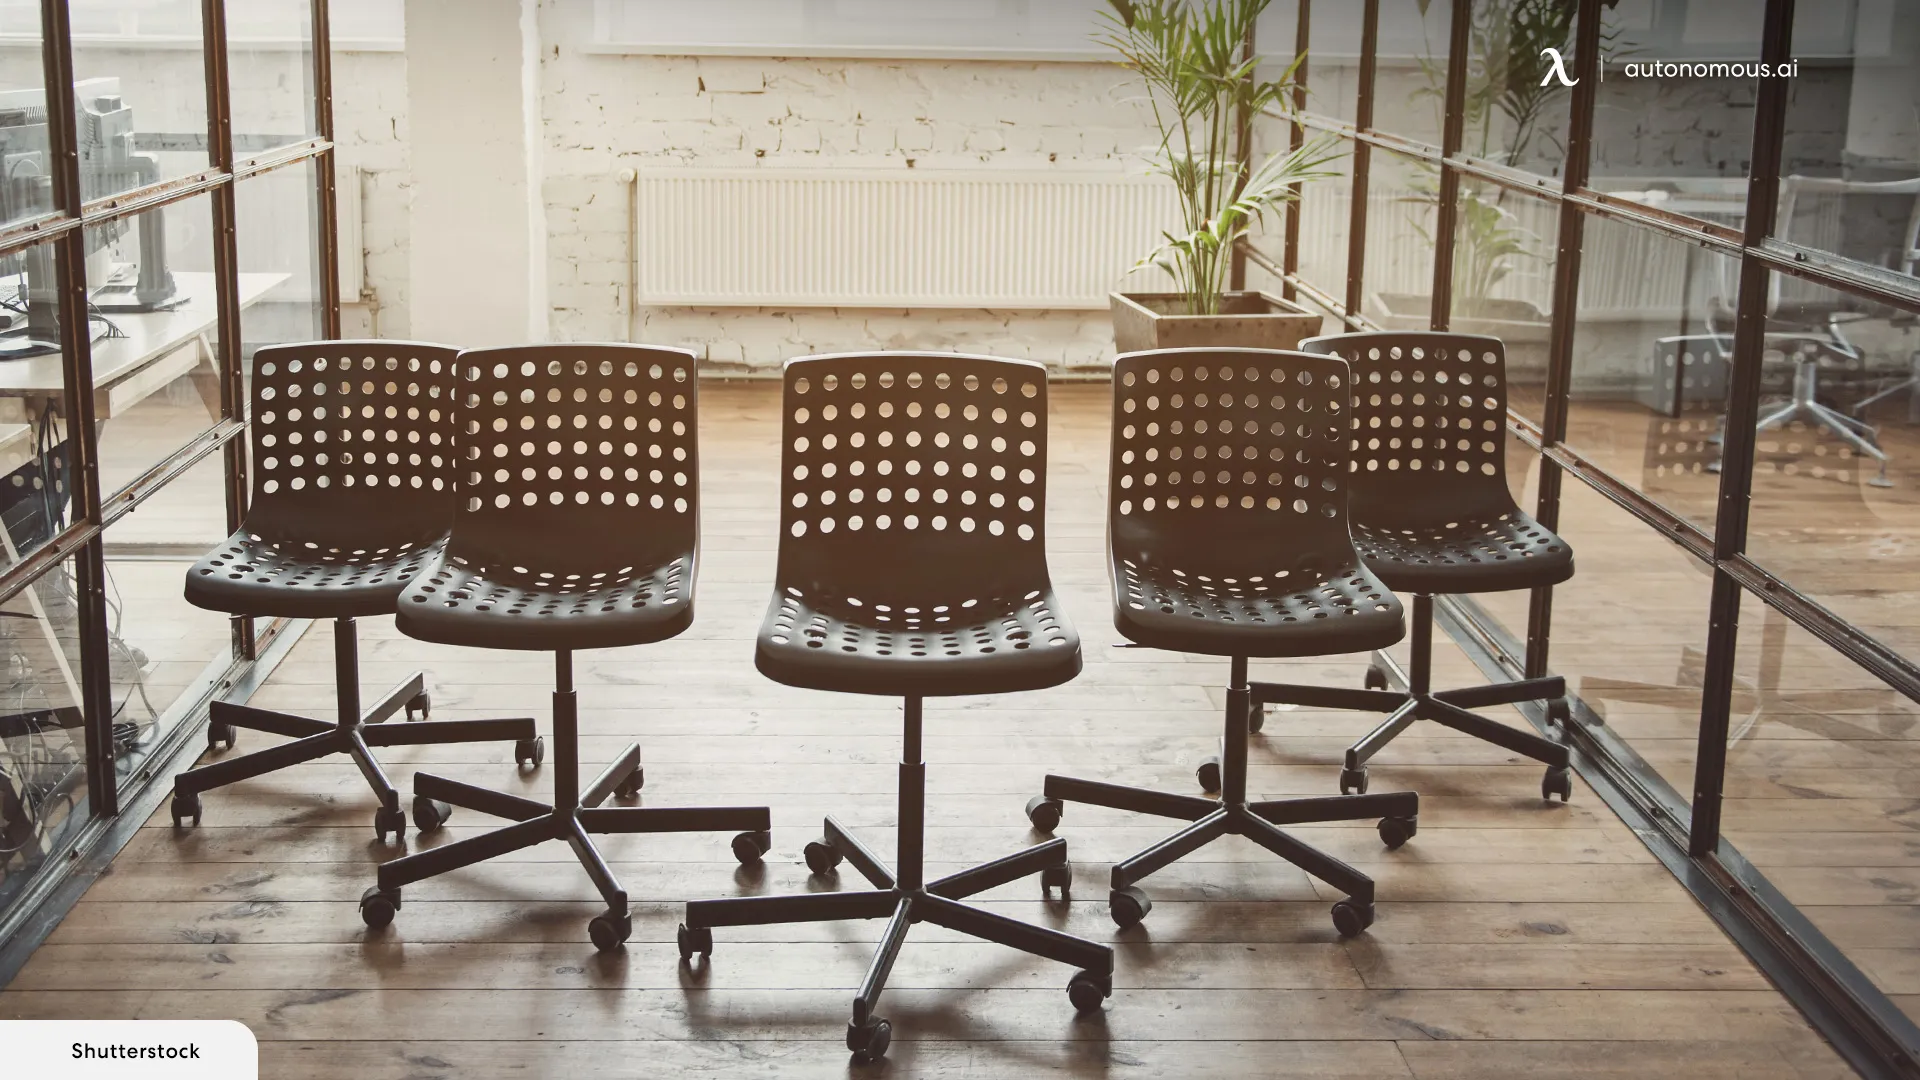 Should You Buy Used Office Furniture in NYC?